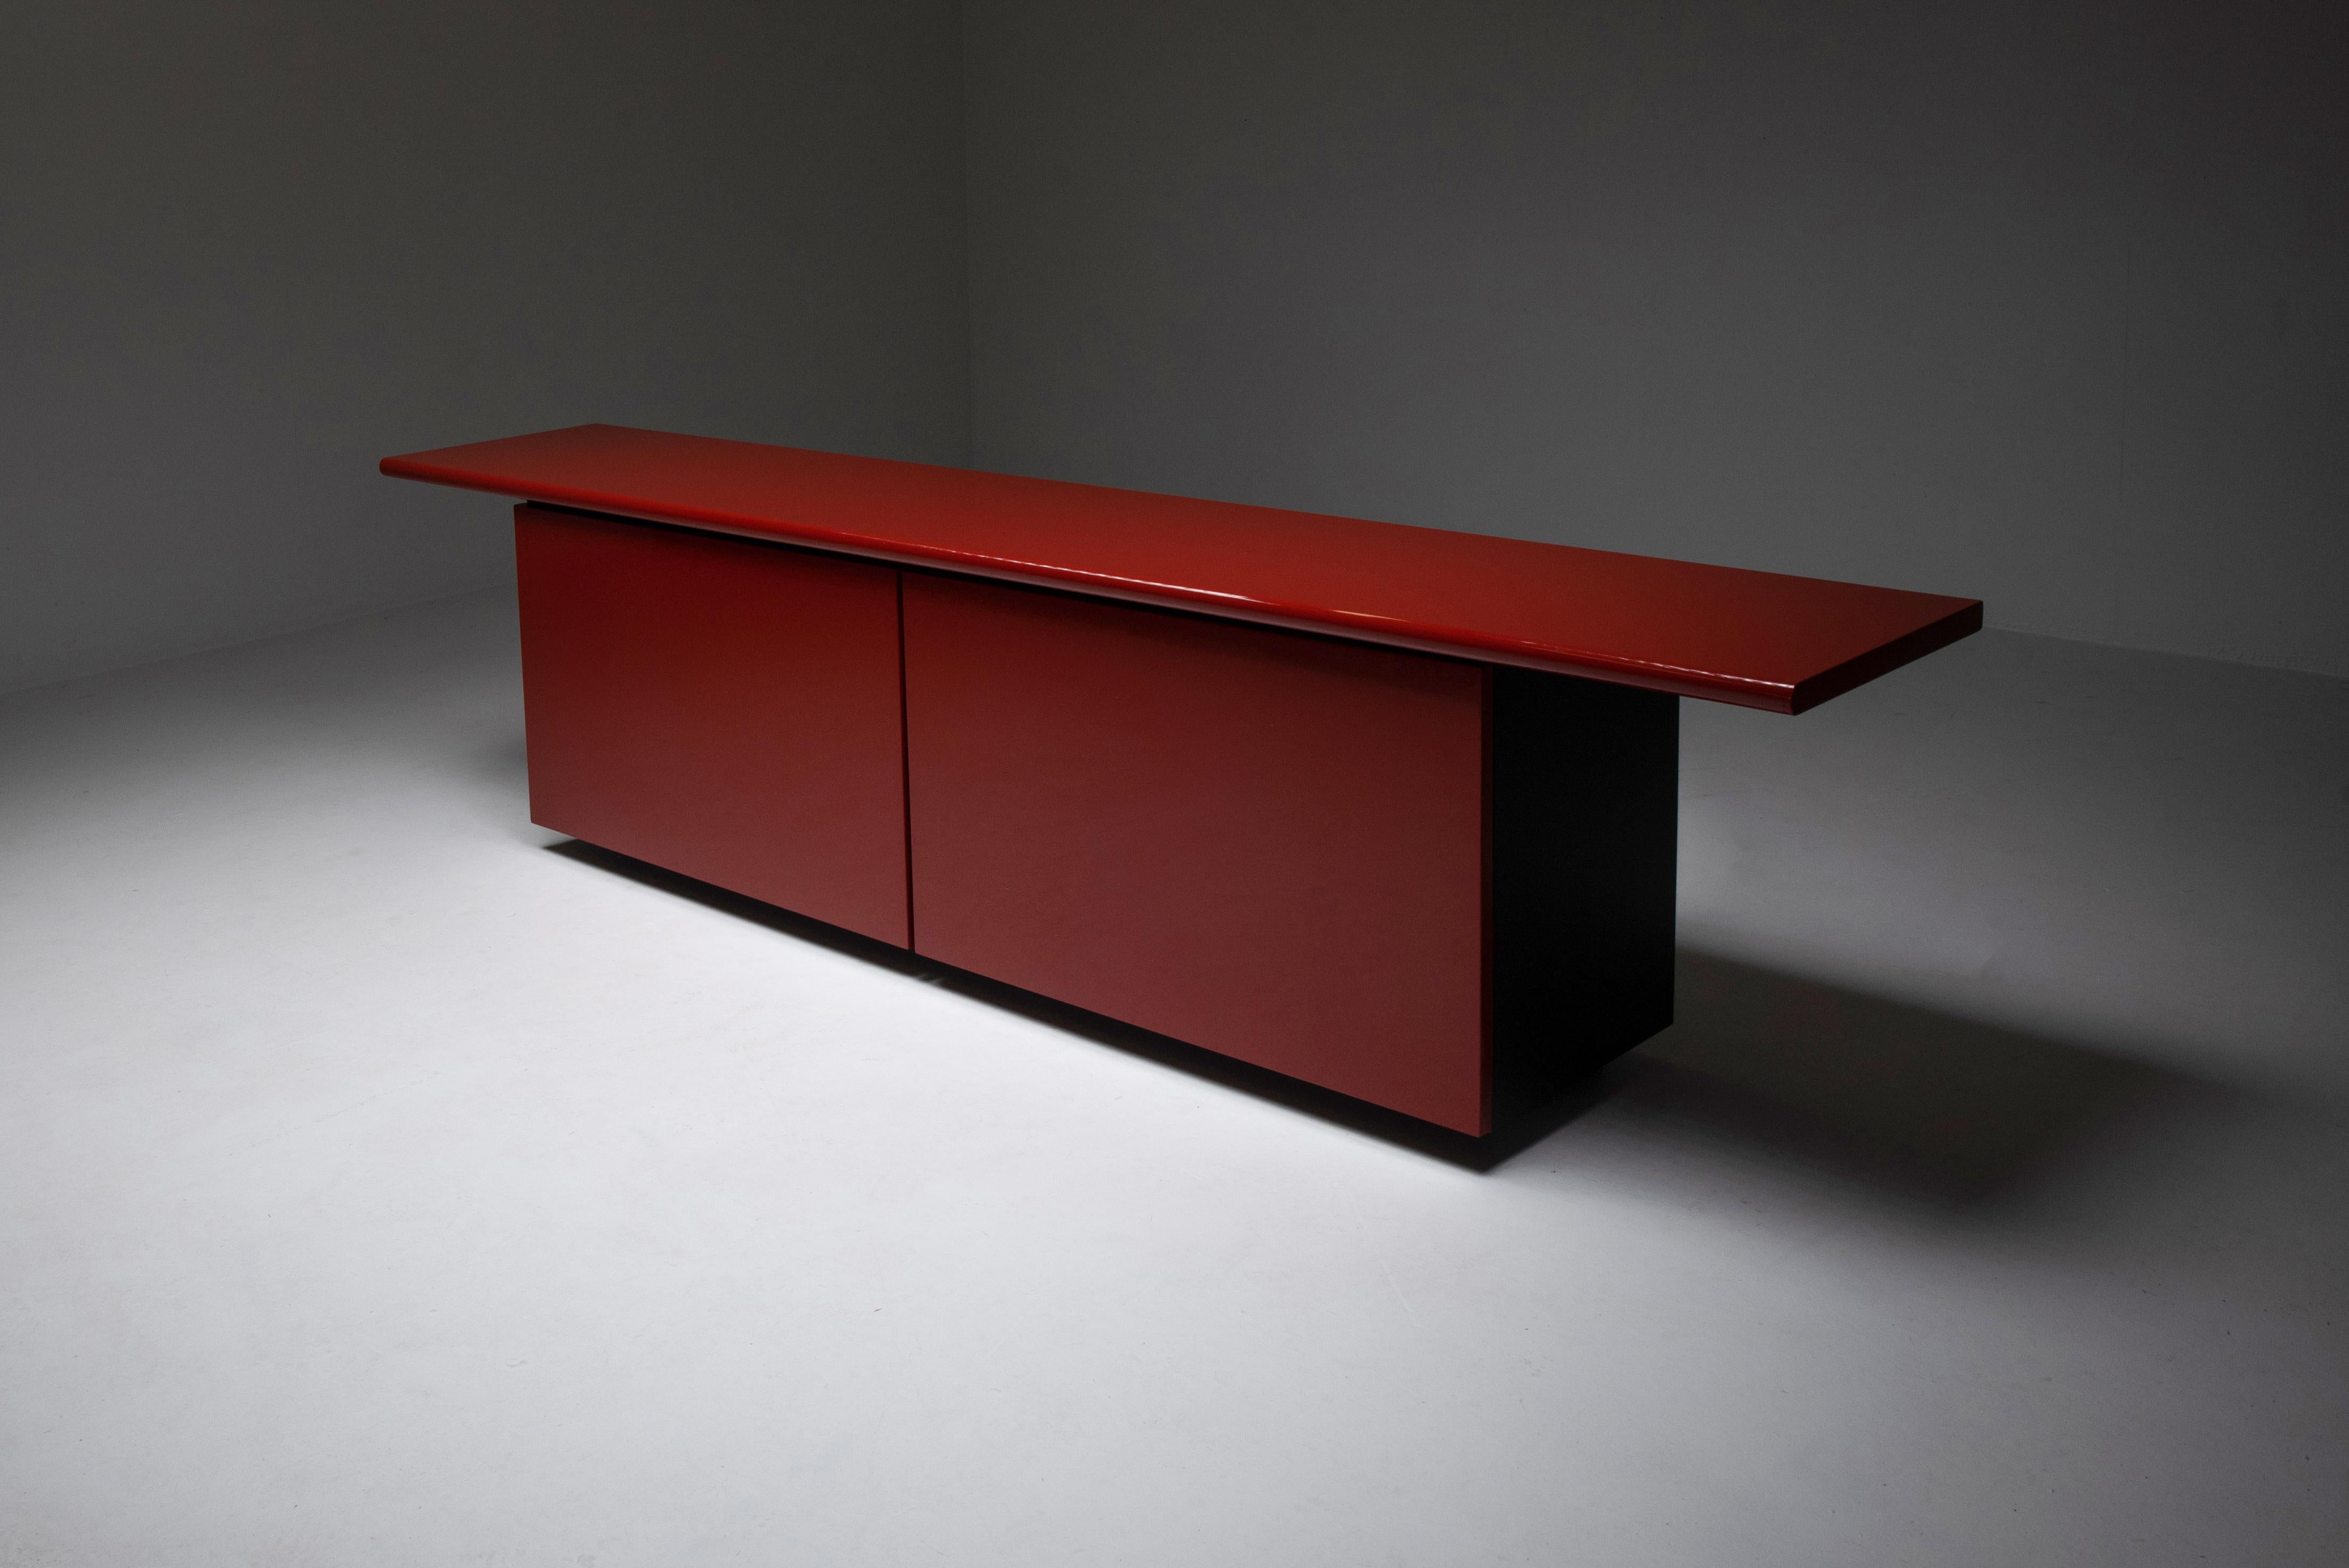 Acerbis, Giotto Stoppino, red lacquer sideboard, Italy, 1977

Postmodern storage piece in red lacquer. The top has a floating appearance because of it's oversize width.
The genius in the design here is that the doors of the credenza slide open